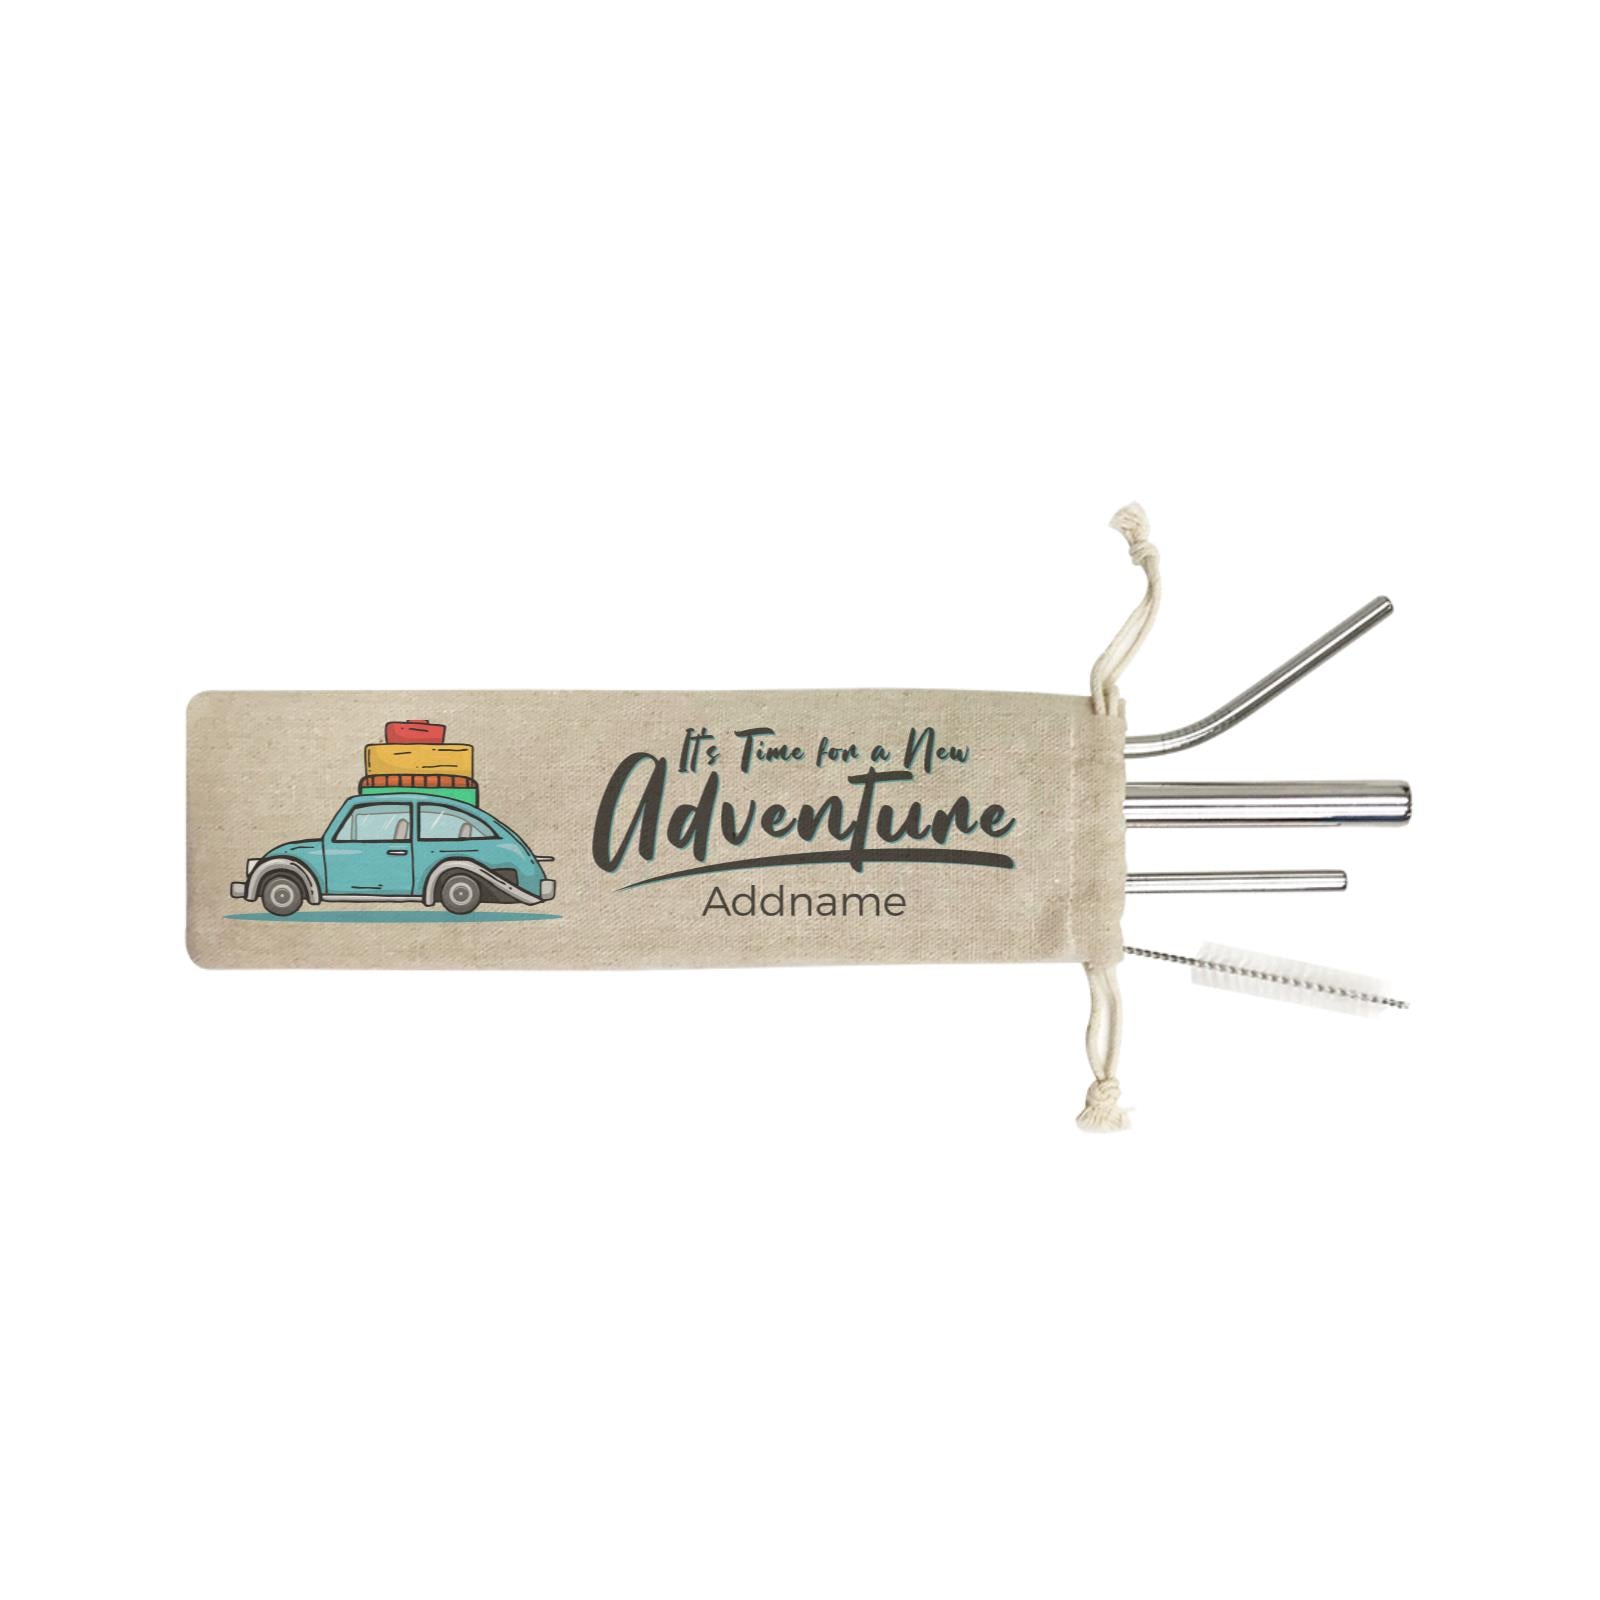 Adventure Quotes It's Time For A New Adventure with Blue Car Addname SB 4-in-1 Stainless Steel Straw Set In a Satchel